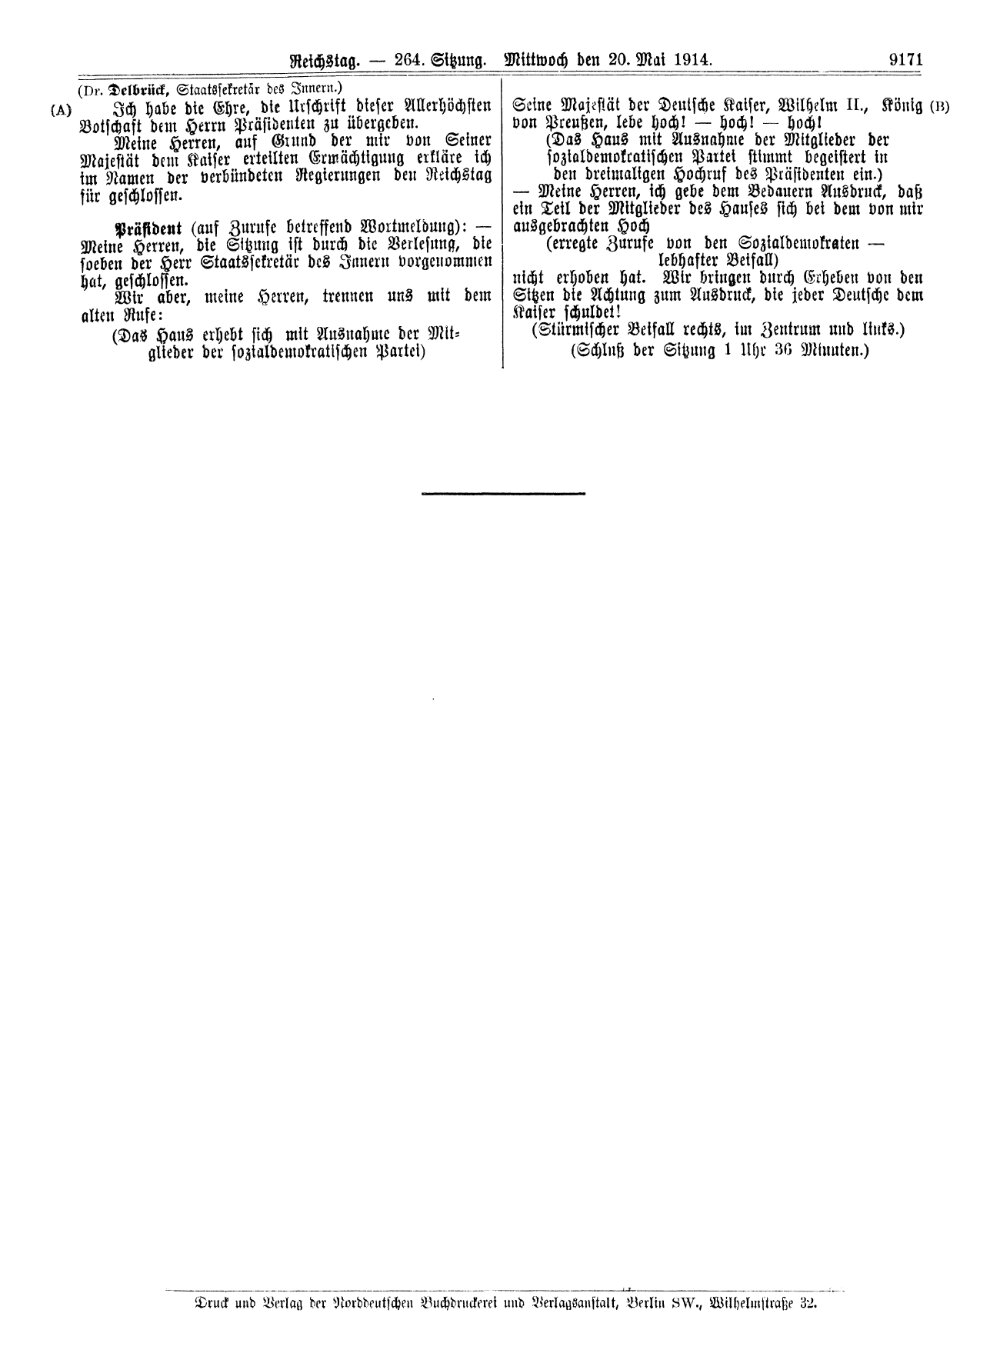 Scan of page 9171